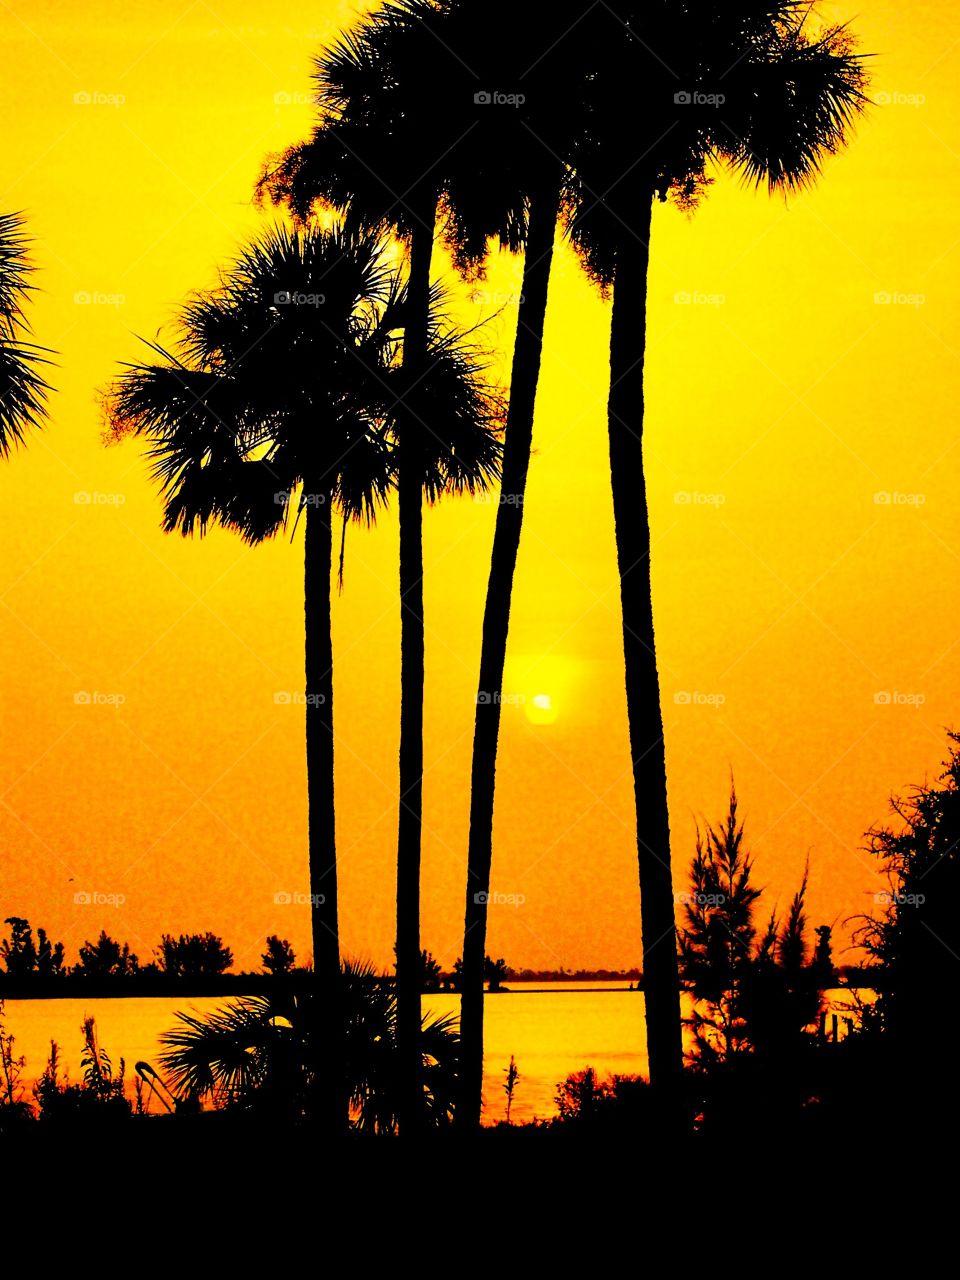 Palm trees and a beautiful sunset